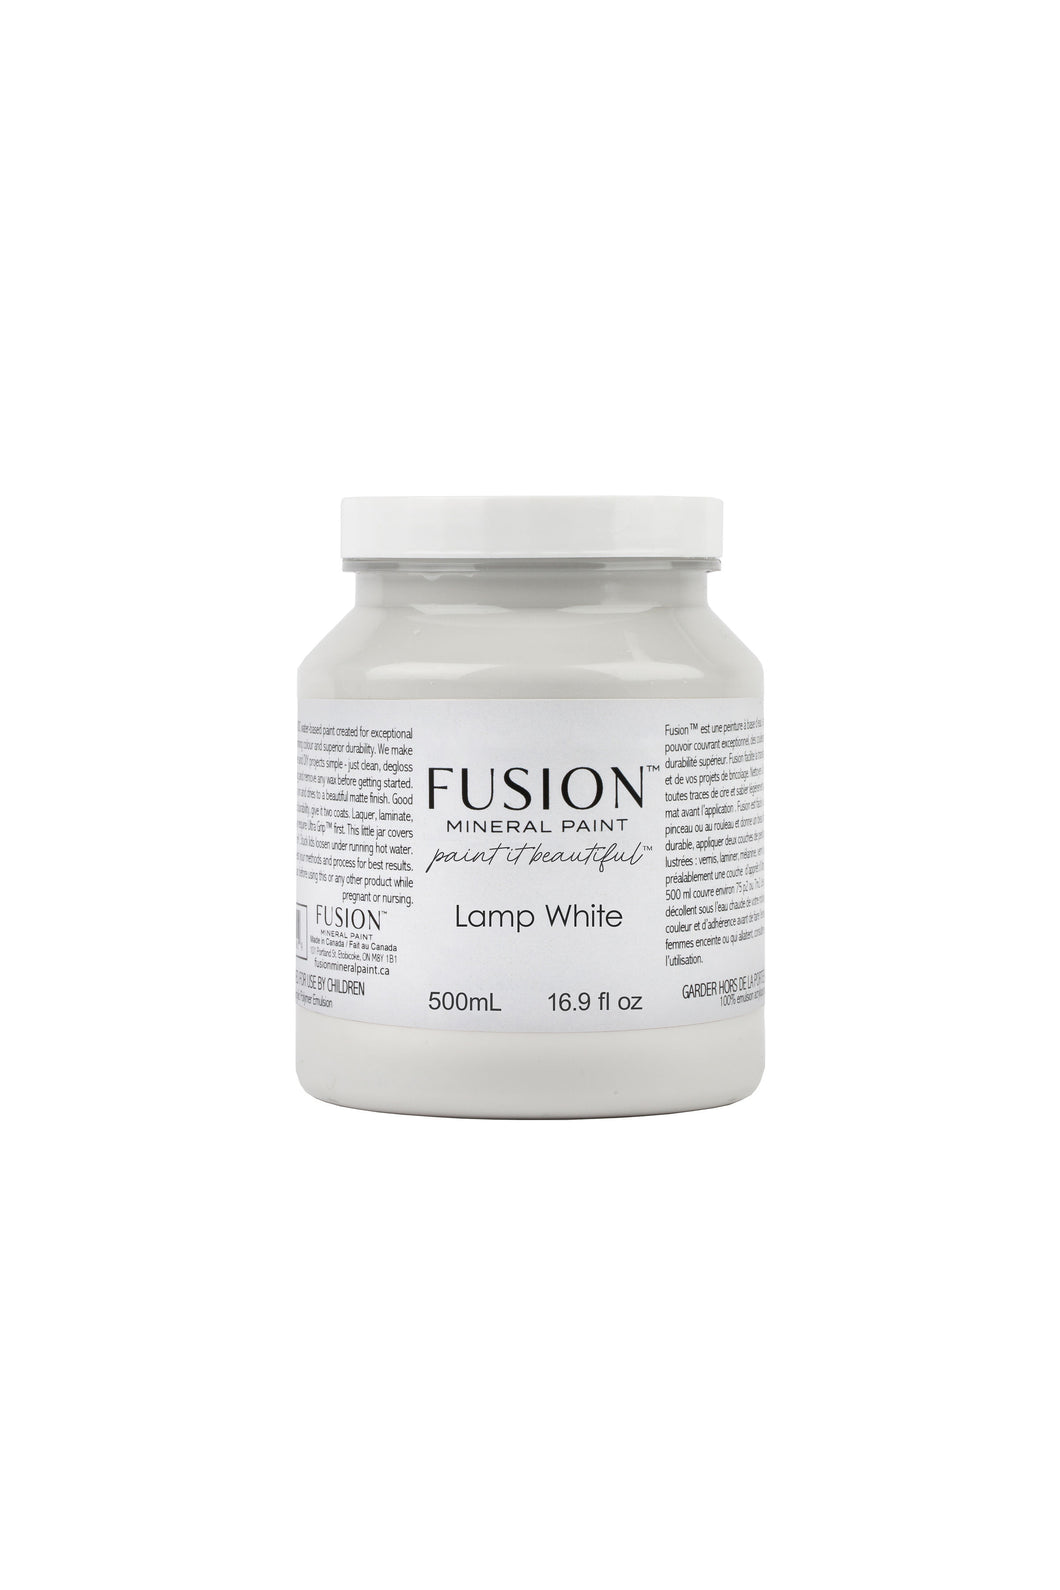 Fusion Mineral Paint - Lamp White 500 ml Jar